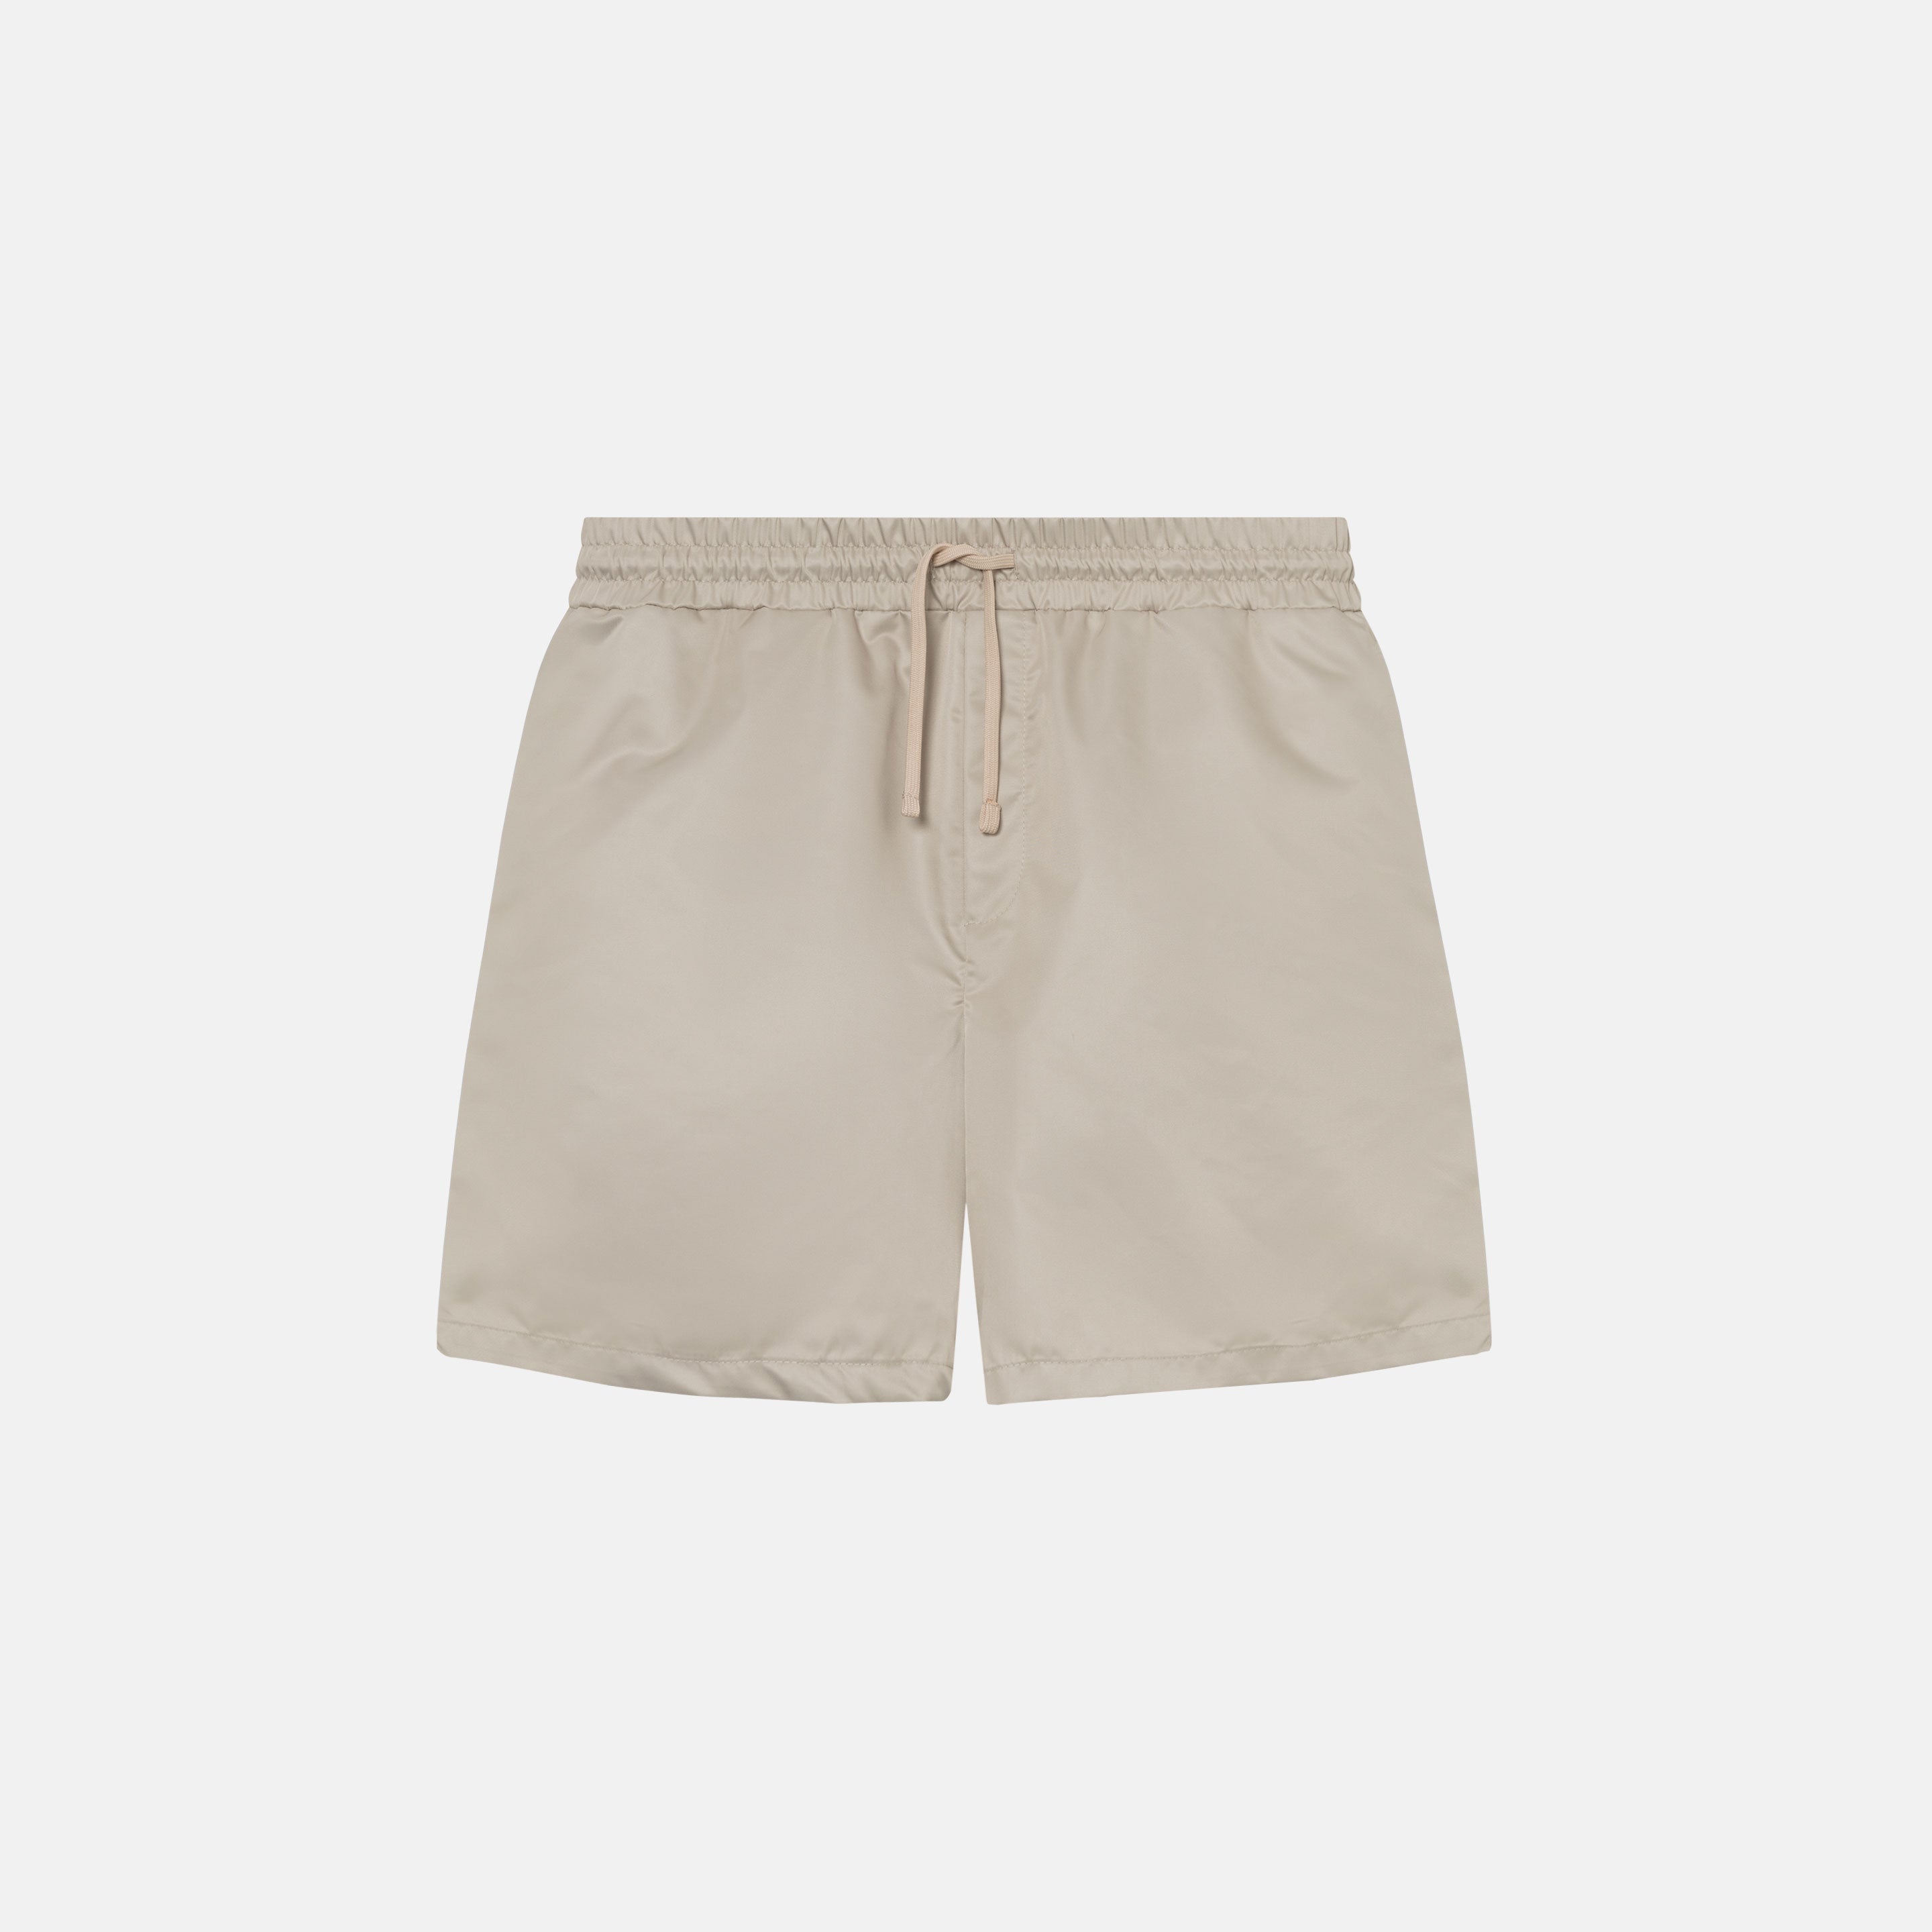 Beige polyester shorts with drawstrings